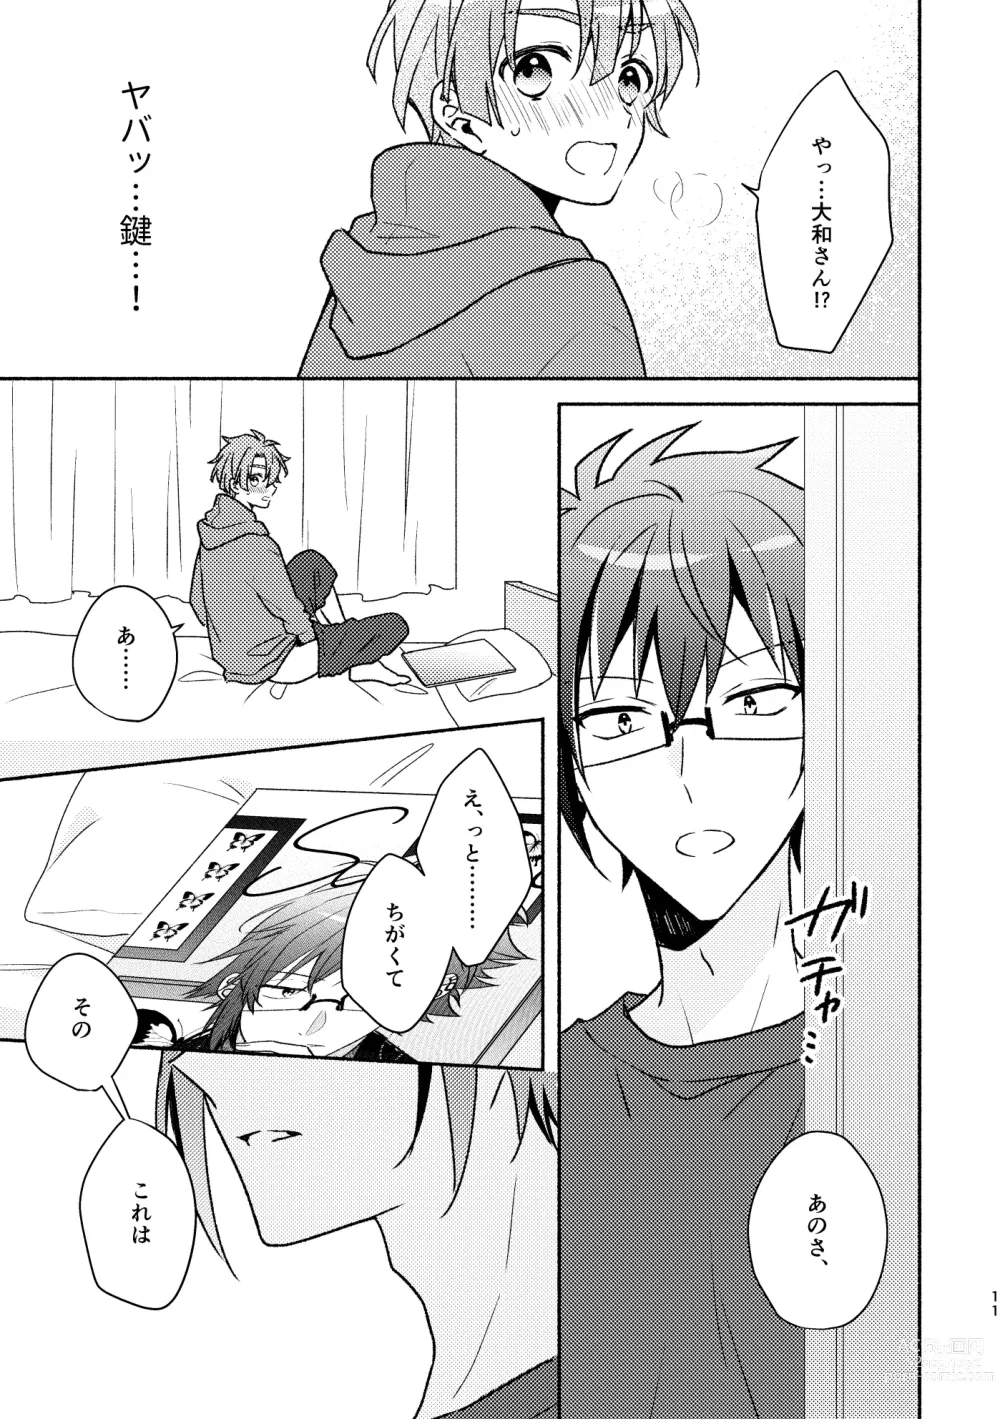 Page 10 of doujinshi Secret Expectations